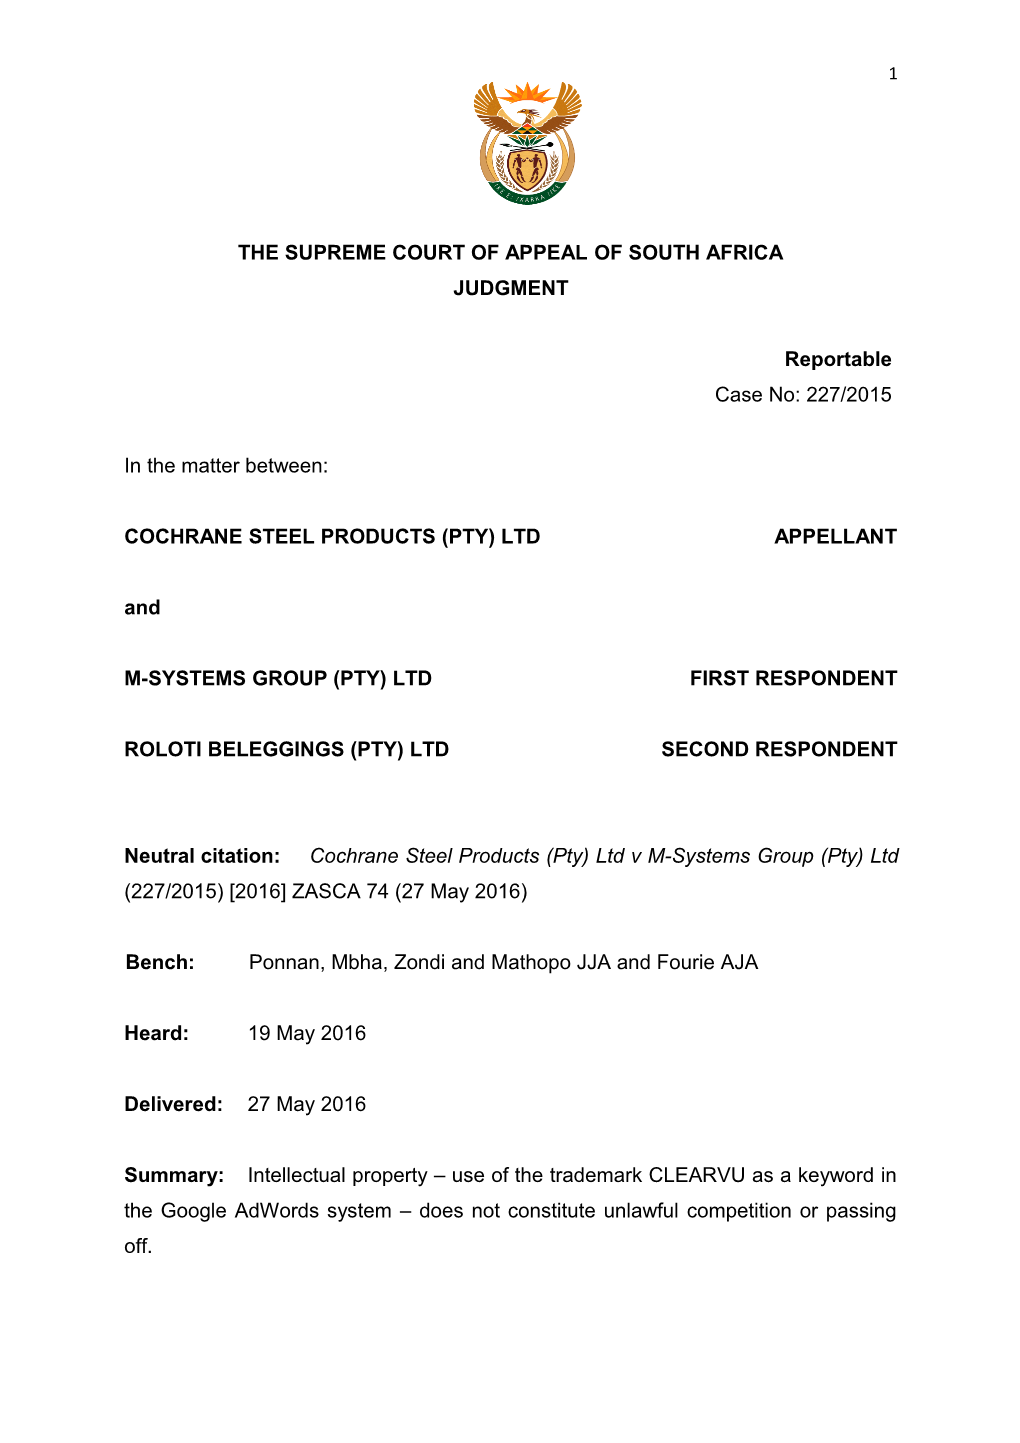 The Supreme Court of Appeal of South Africa s5